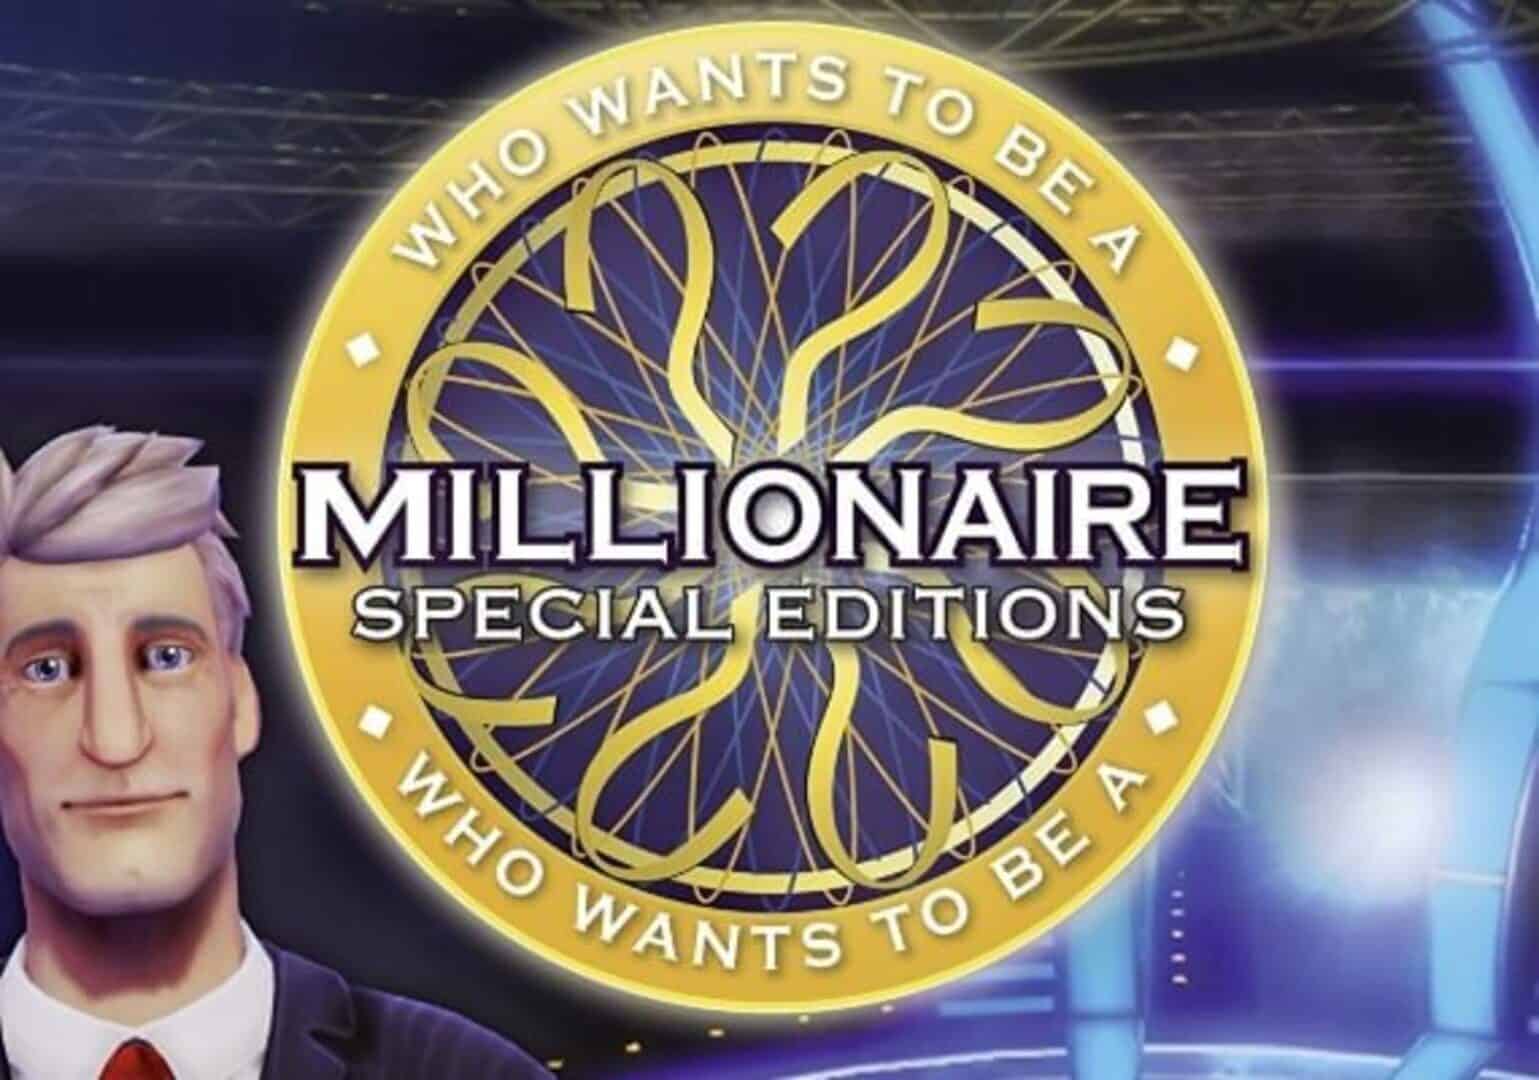 Who Wants to Be a Millionaire: Special Editions